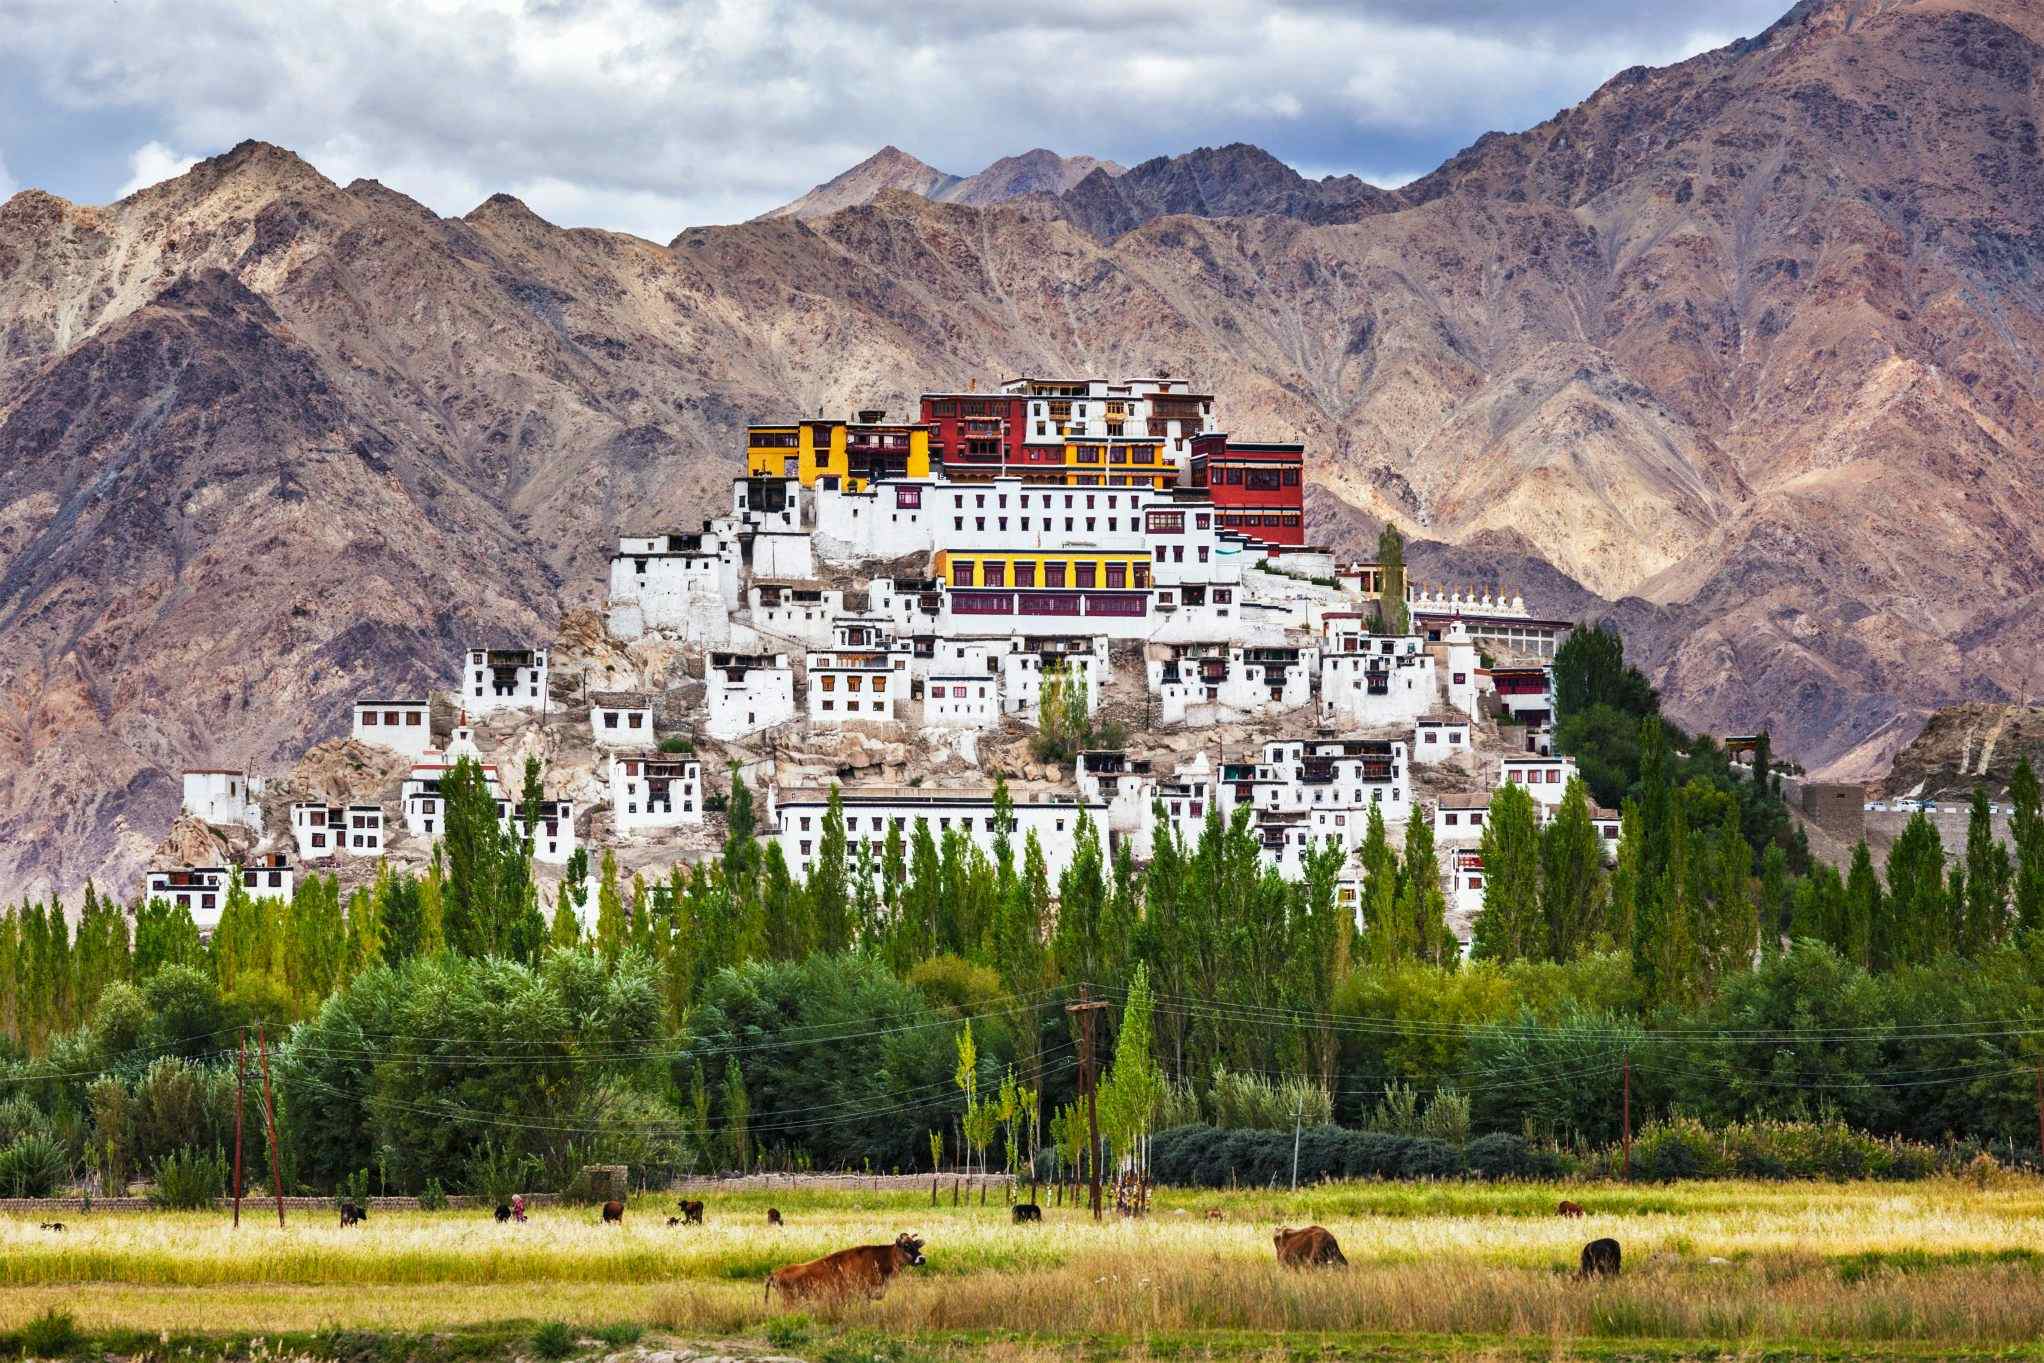 Thiksey Monastery on a hilltop above Leh in Ladakh, India.